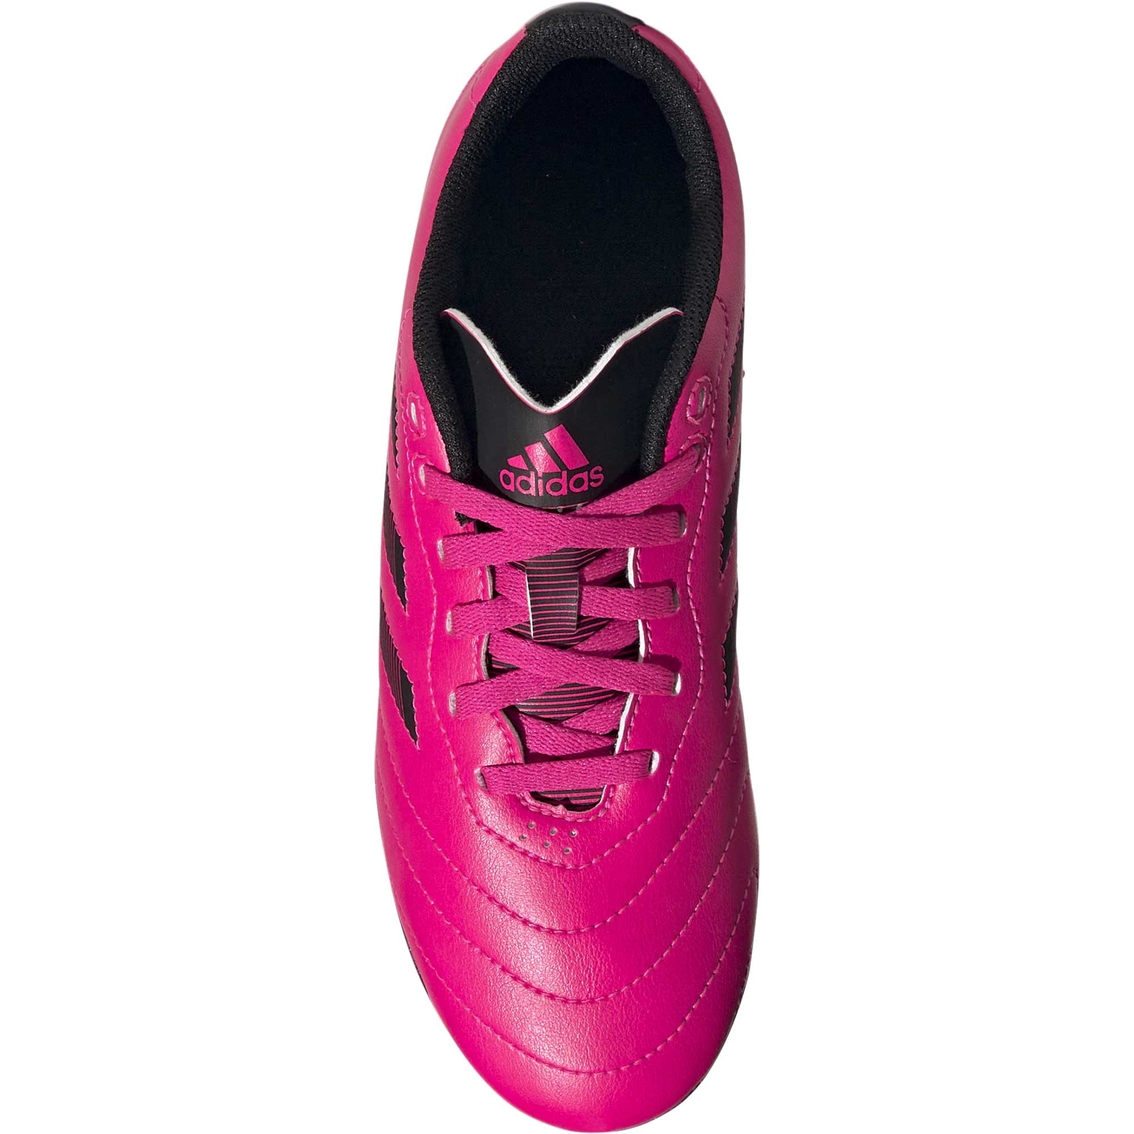 Adidas Grade School Girls Goletto VII Firm Ground Jr. Soccer Cleats - Image 4 of 8